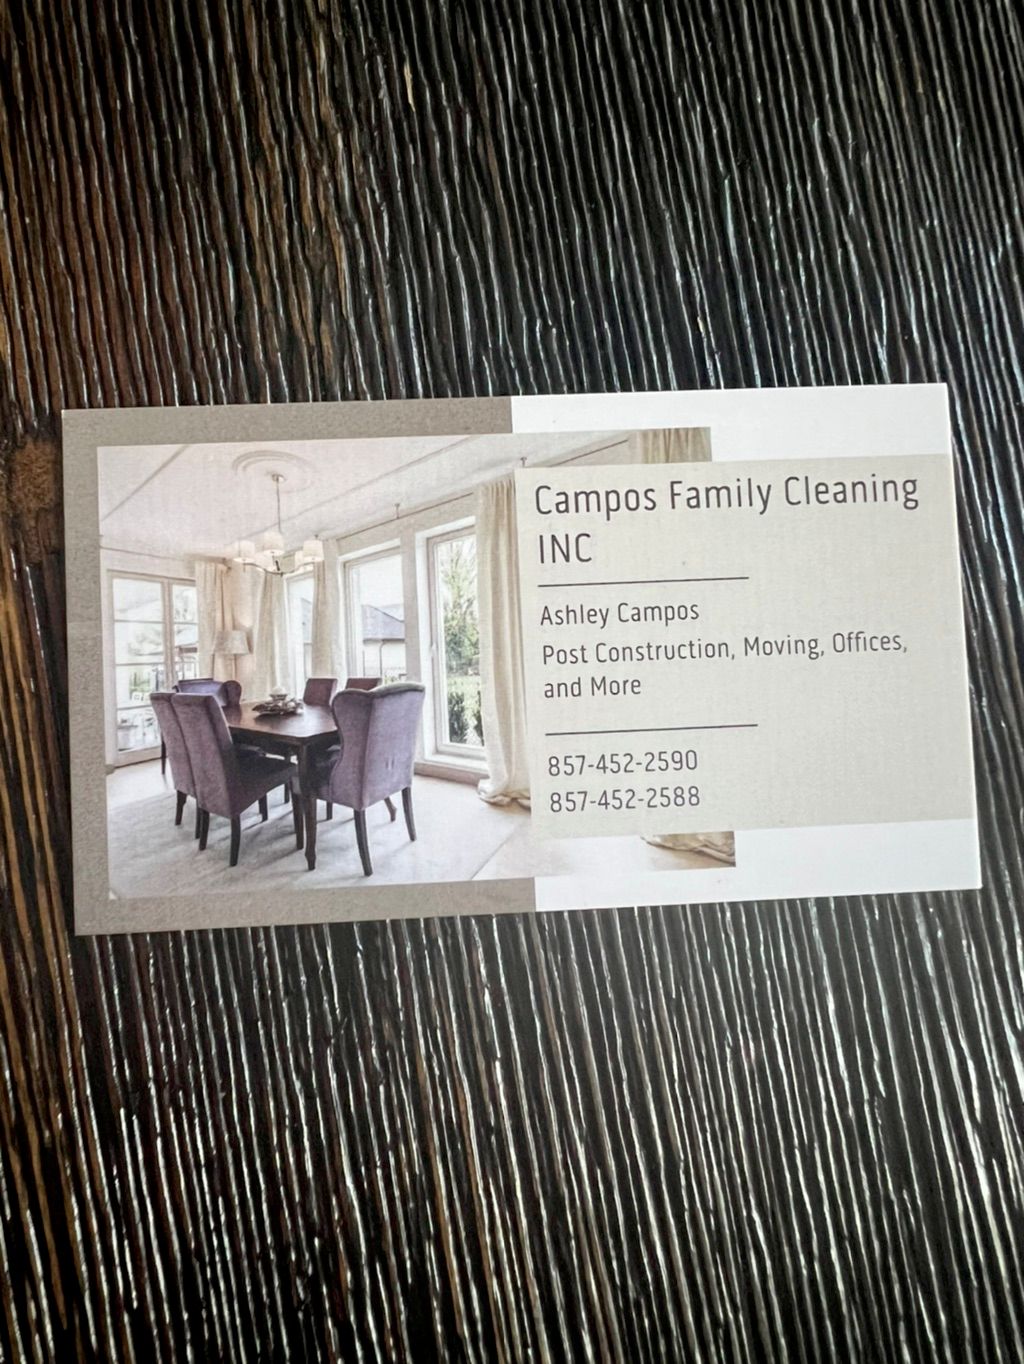 Campos Family Cleaning INC